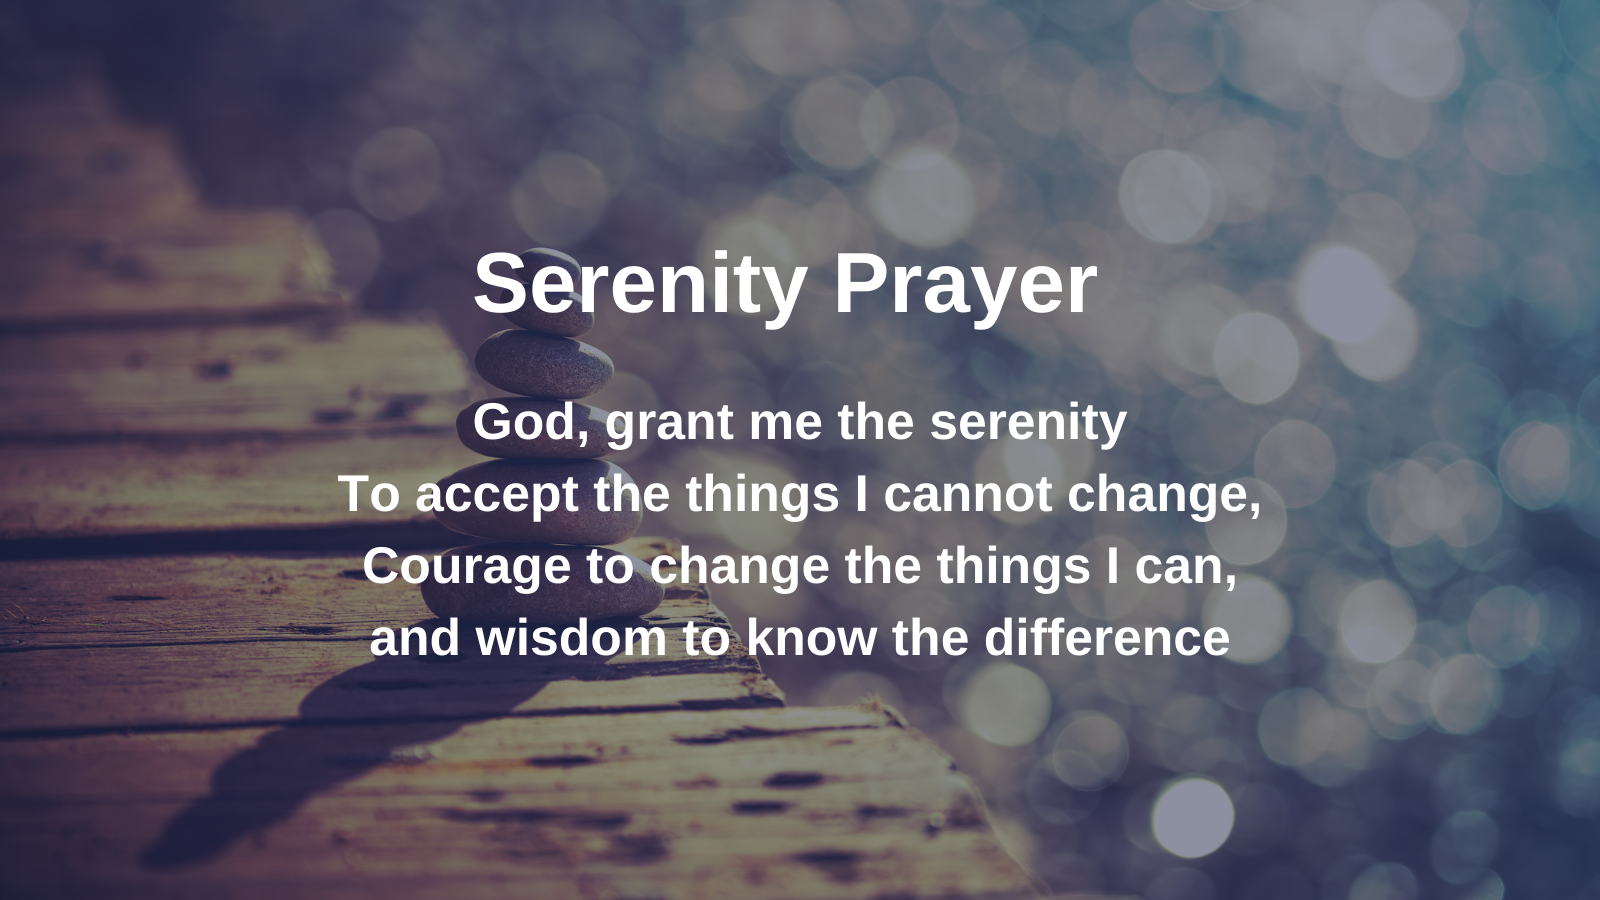 God, grant me the serenity to accept the things I cannot change, courage to change the things I can, and wisdom to know the difference.